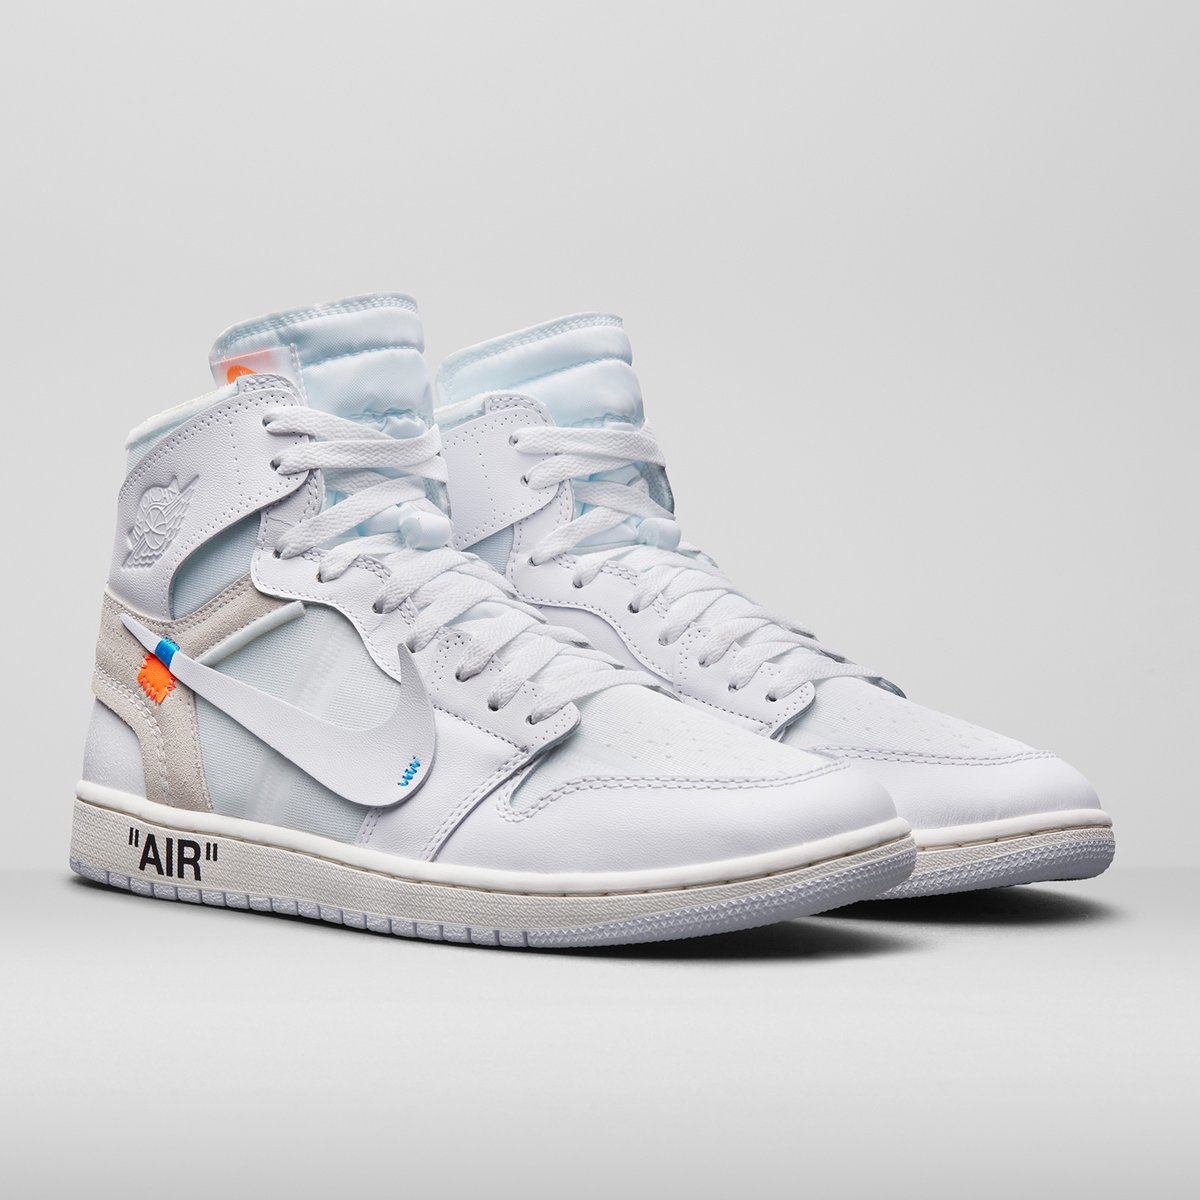 Jordan And Off-White Air Force 1 Dropping In Europe On March 3rd